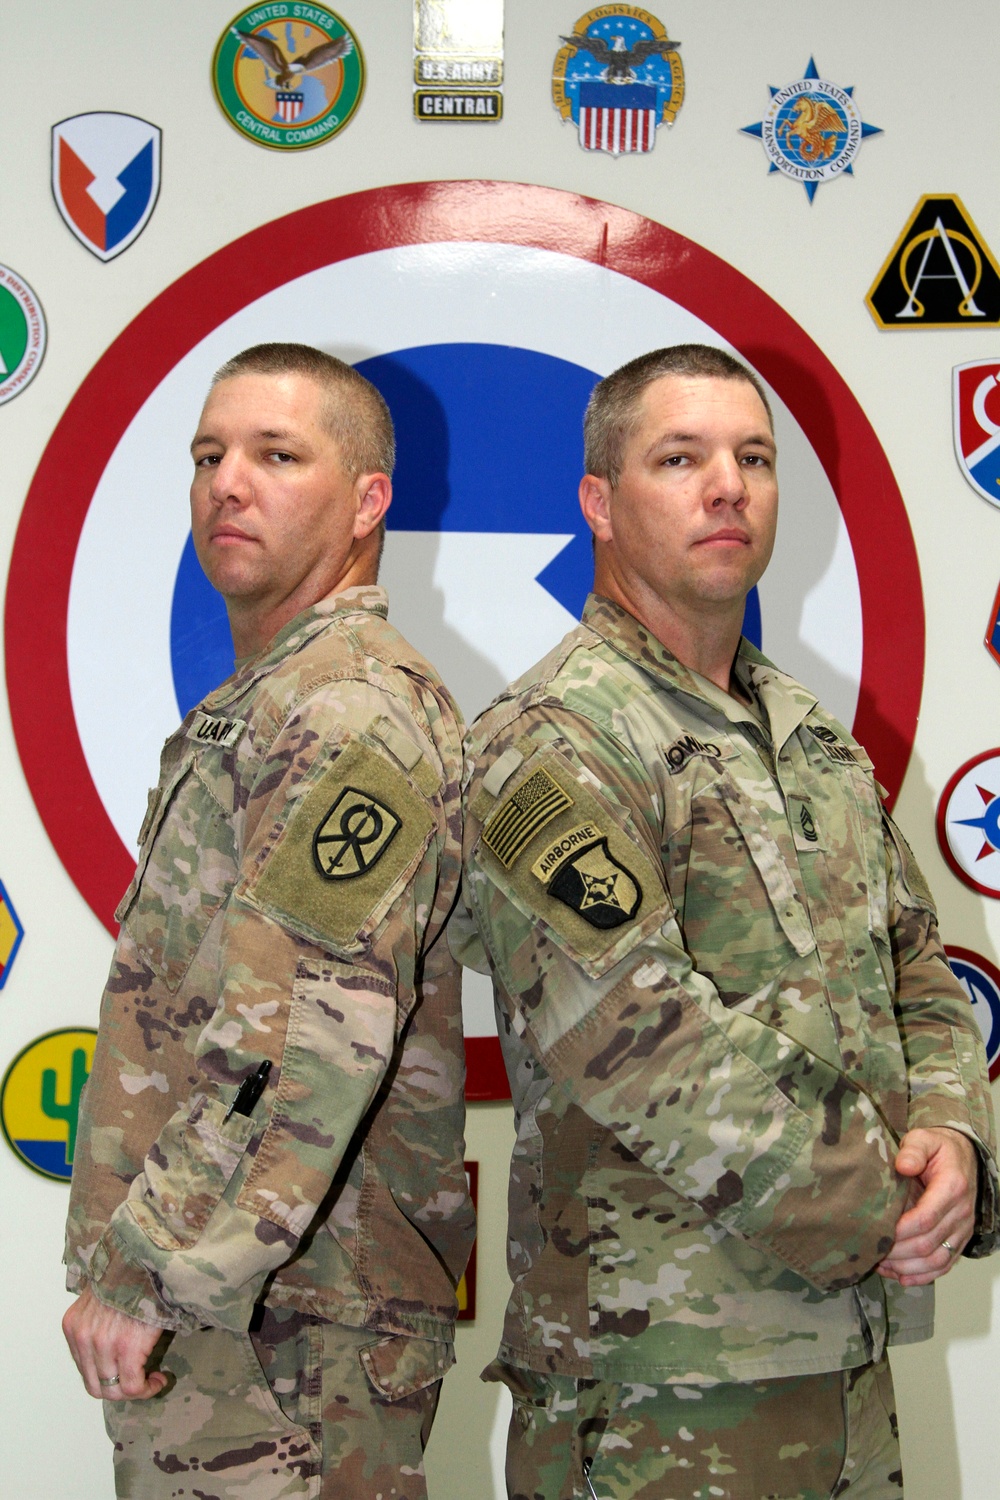 Third Times a Charm - Twin Brothers Deploy Together Again